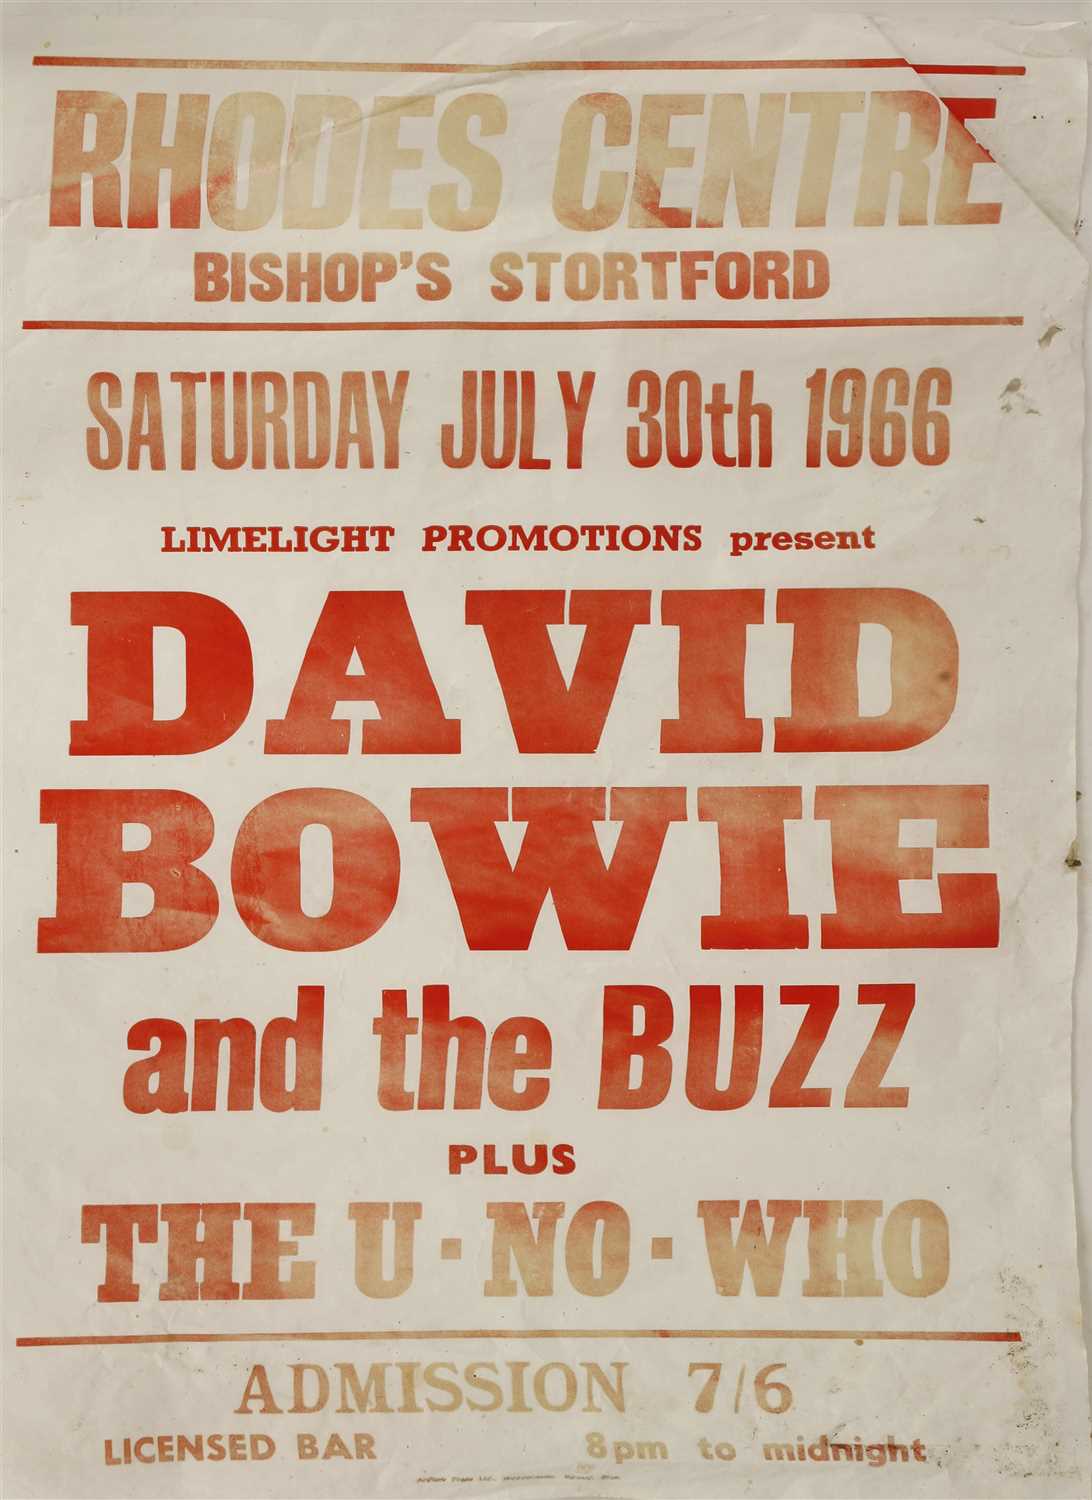 Lot 216 - A David Bowie and The Buzz concert poster